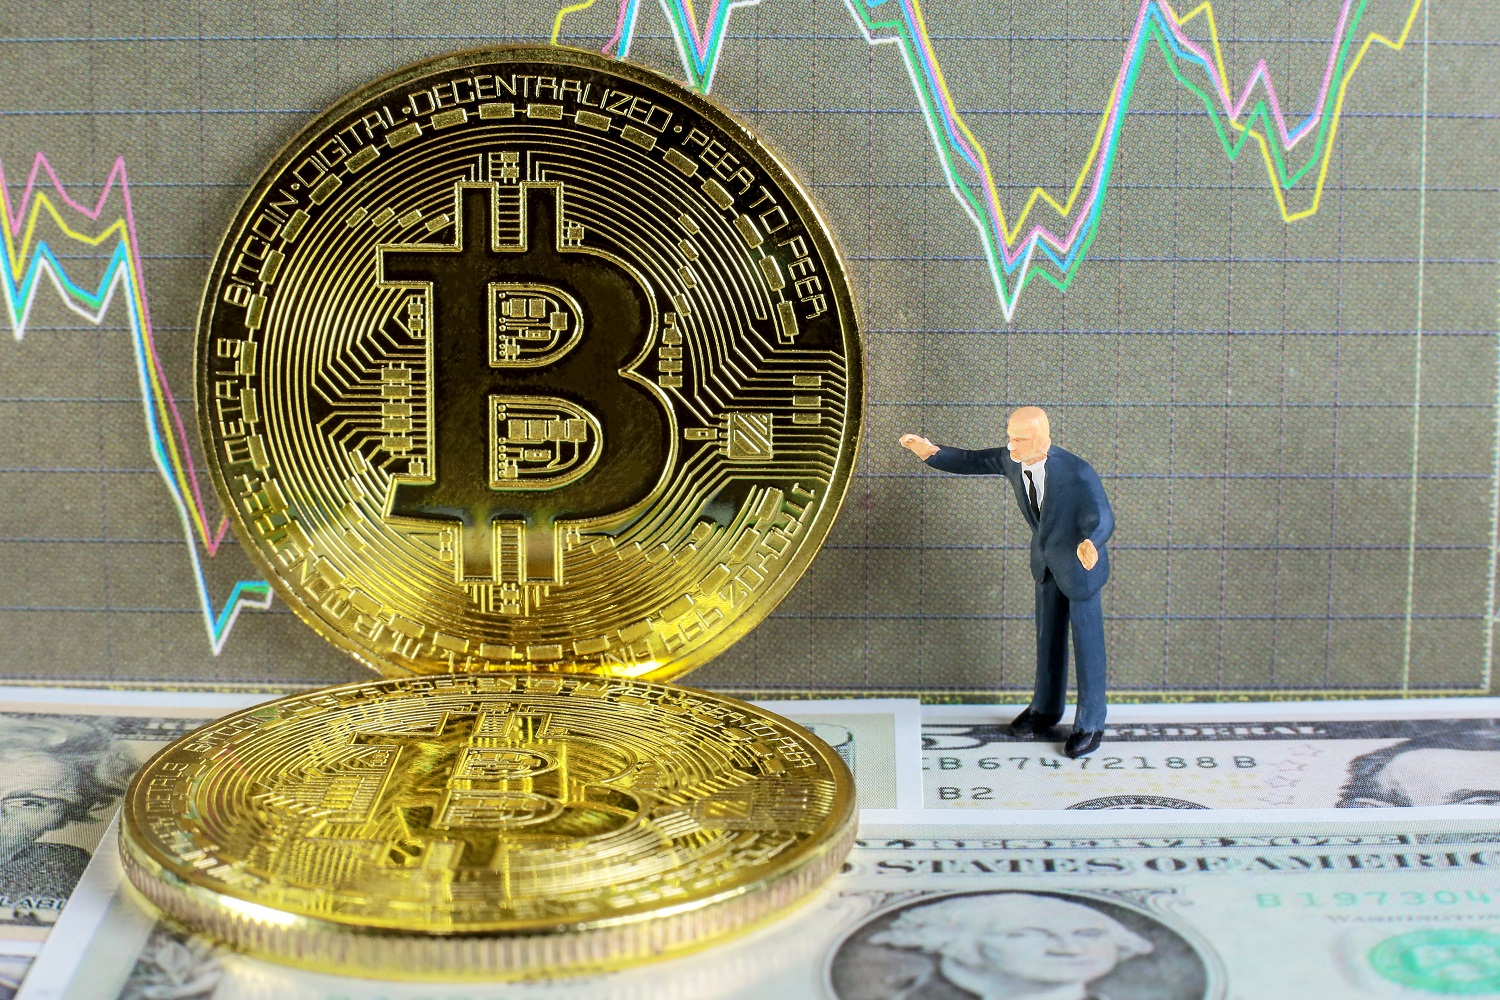 This Price Resistance Level May Hold Key To Bitcoin Bull Market